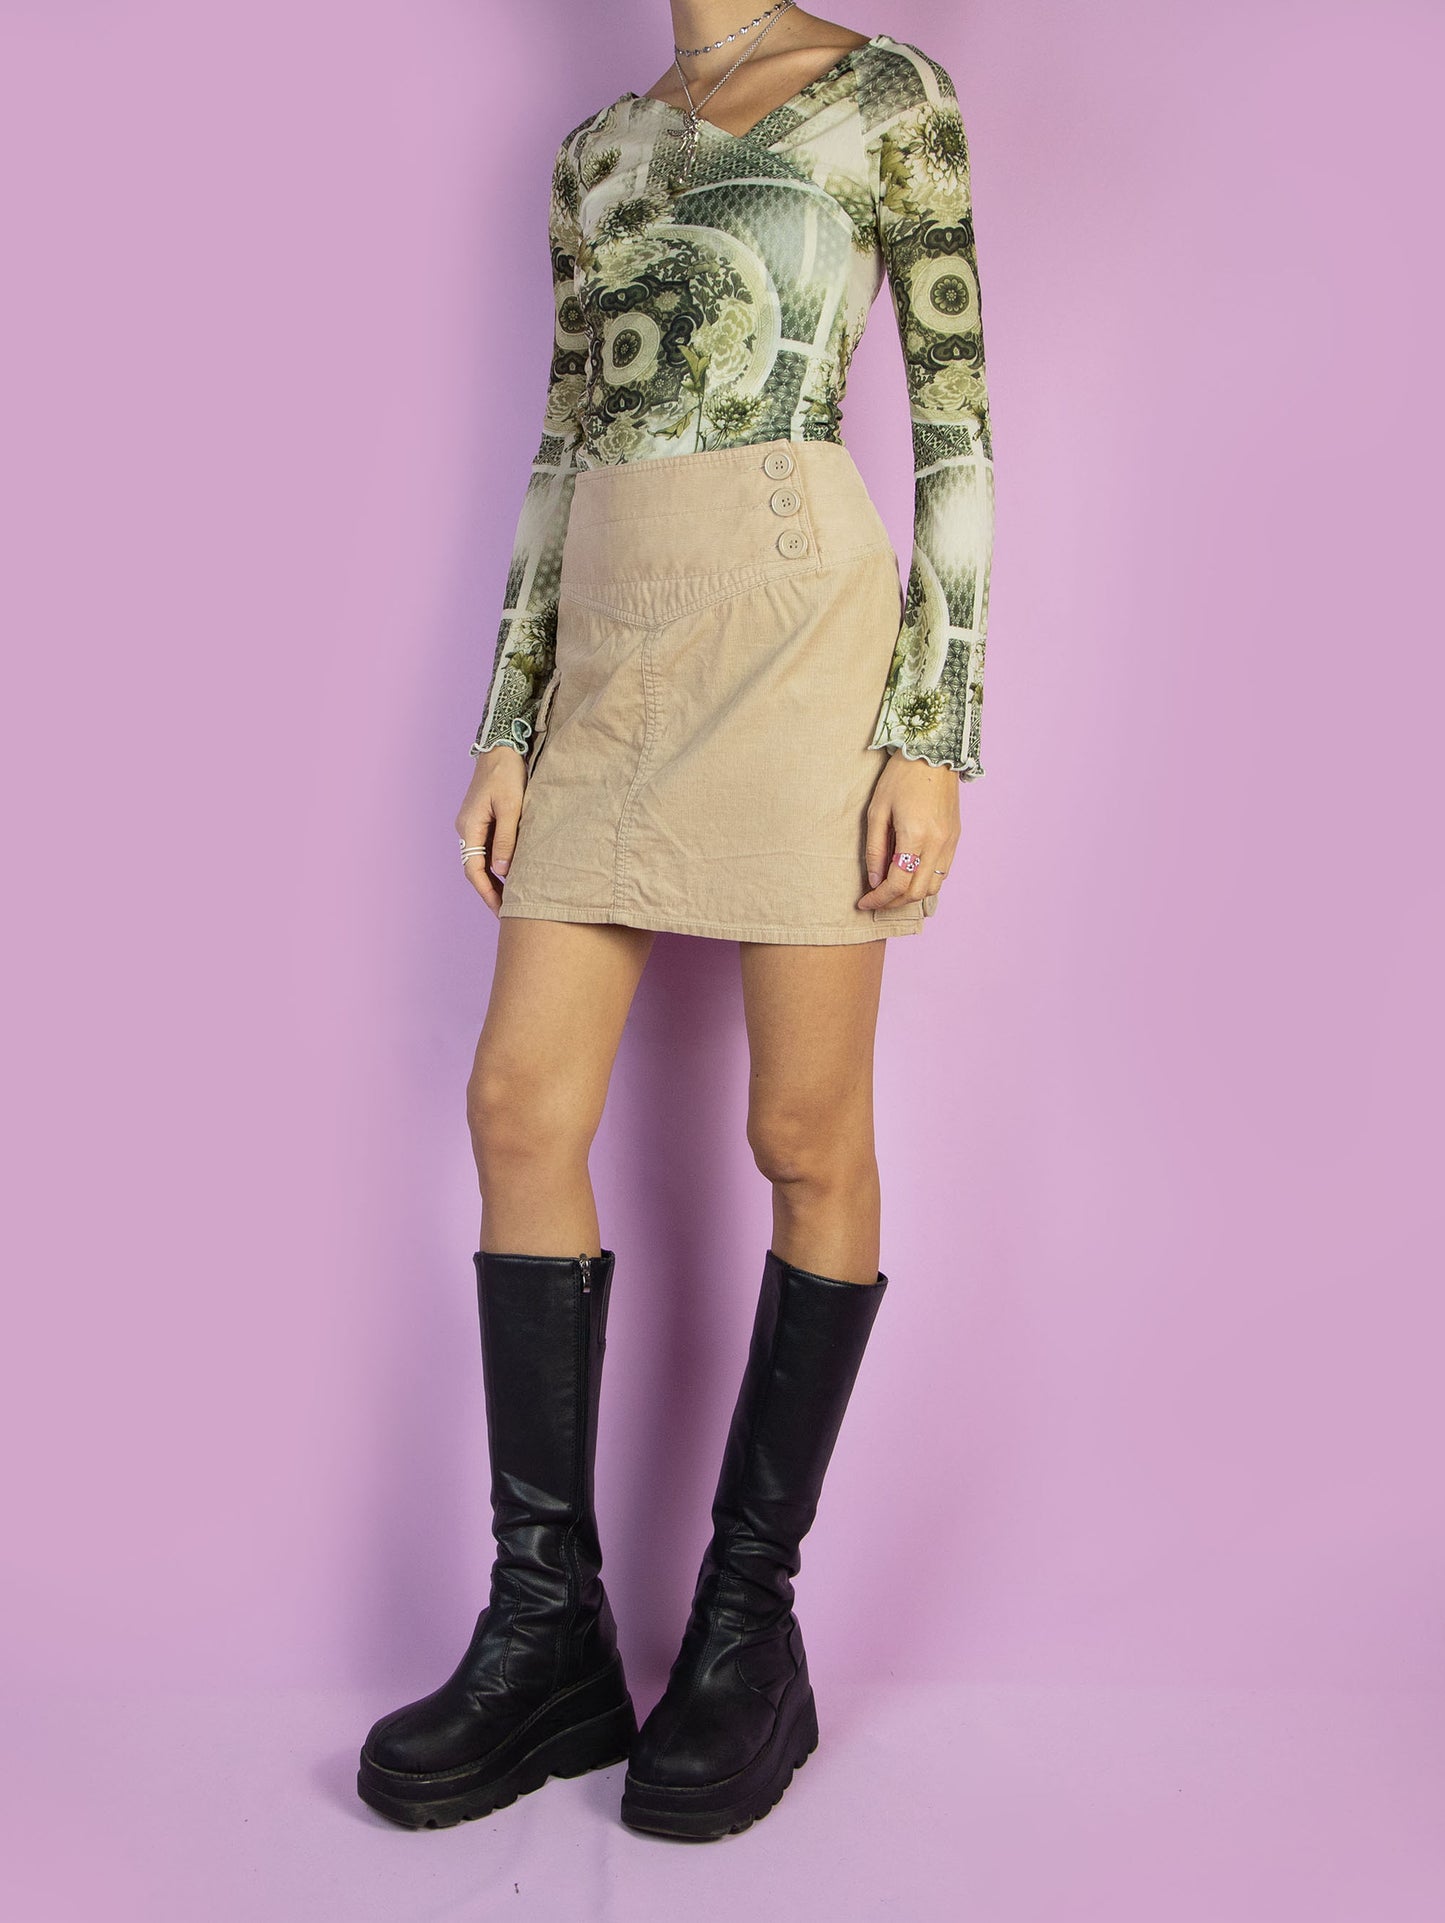 The Y2K Grunge Beige Mini Skirt is a vintage beige corduroy skirt with a pocket and a back zipper closure. Subversive utility cargo style 2000s mini skirt.